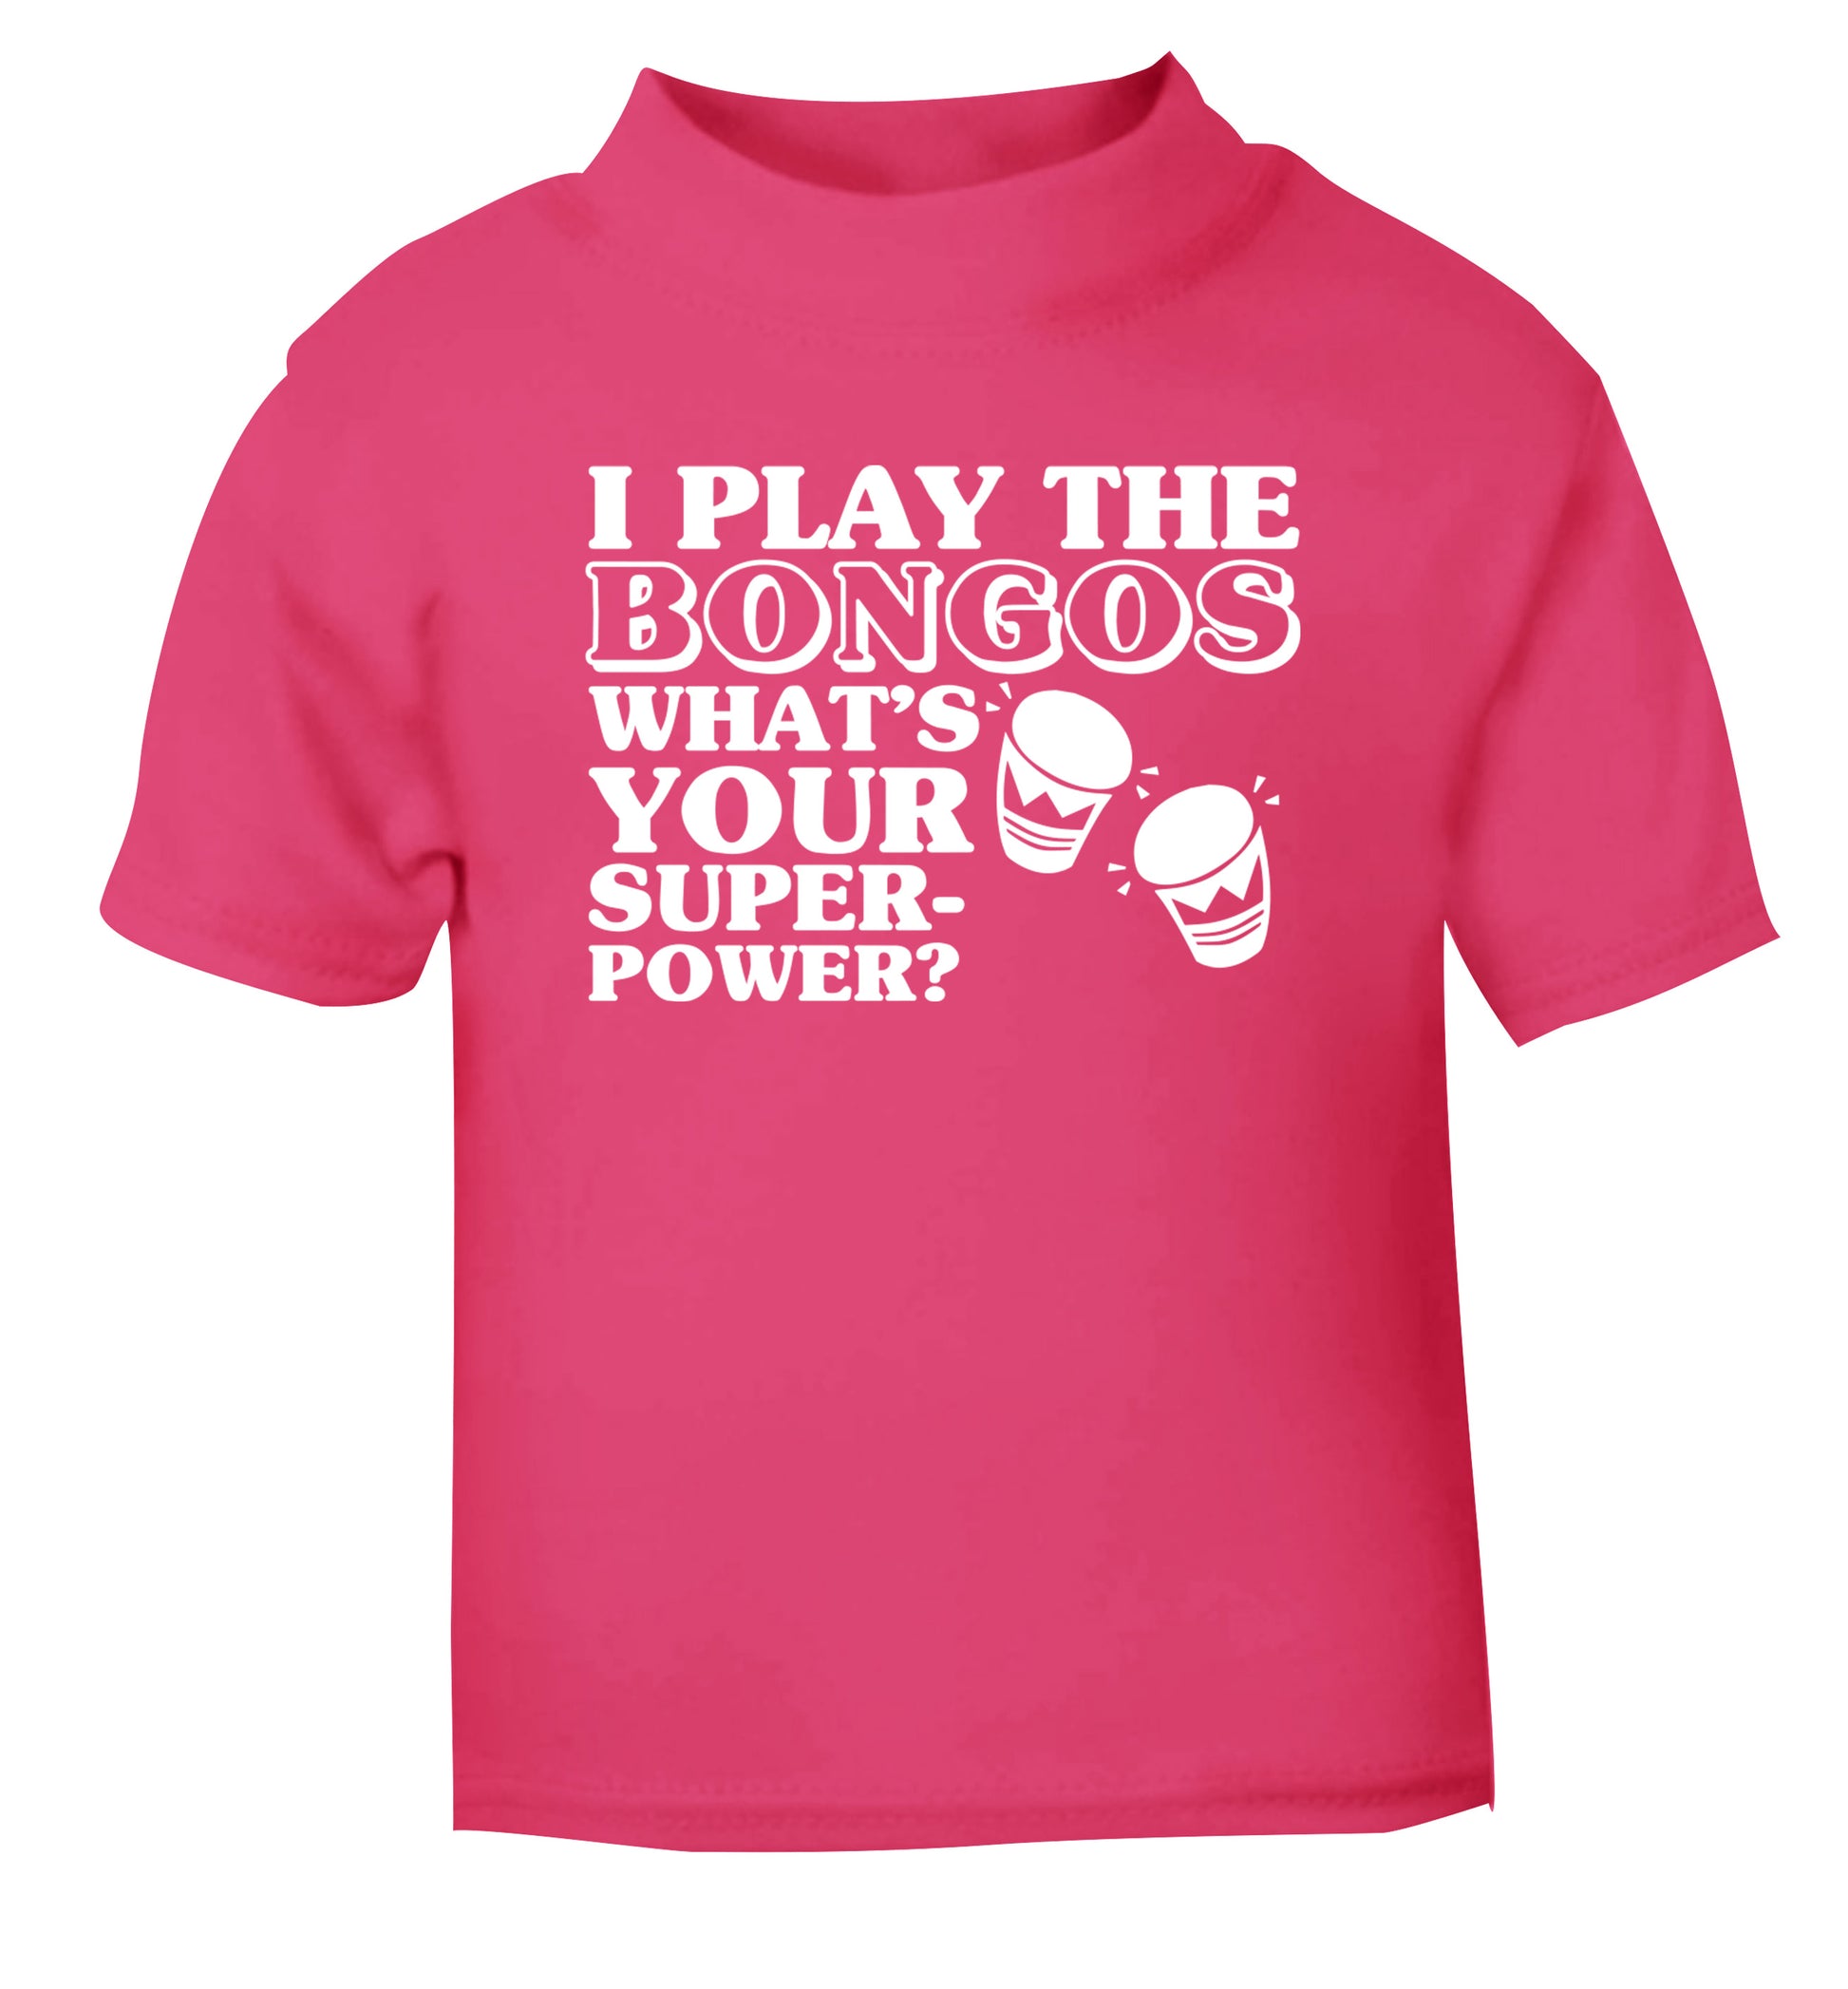 I play the bongos what's your superpower? pink Baby Toddler Tshirt 2 Years